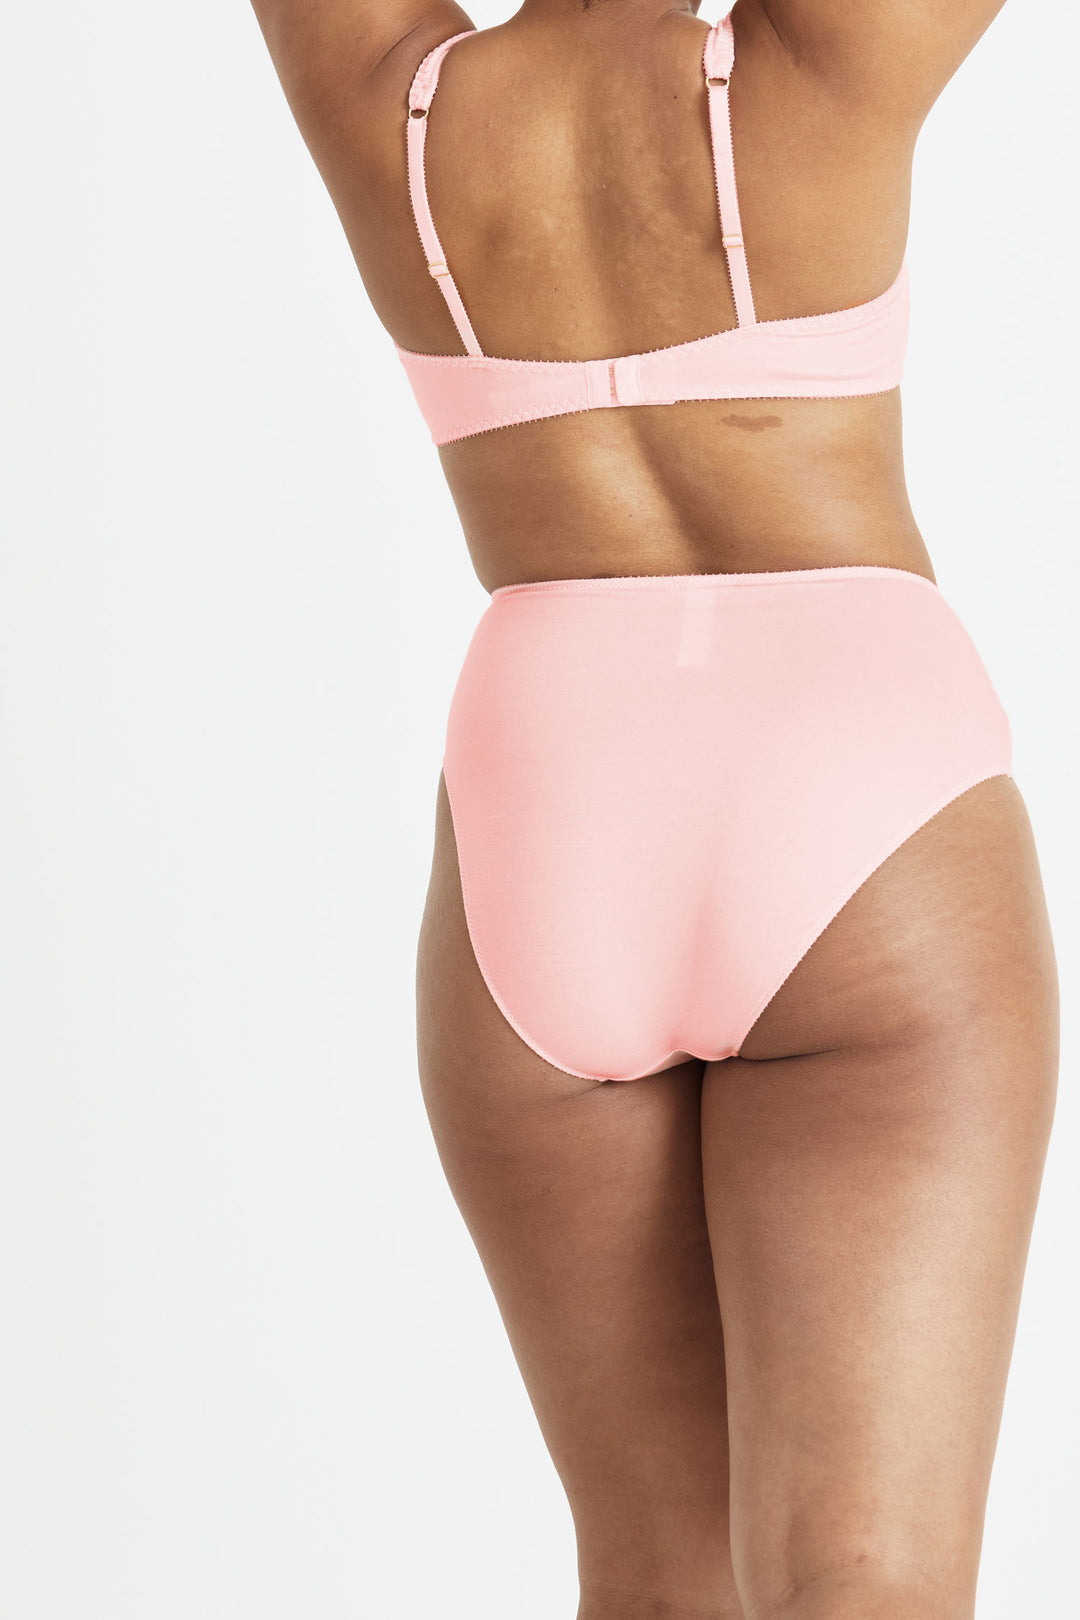 Videris Lingerie high waist knicker in rosy pink TENCEL™  with cheeky bottom coverage